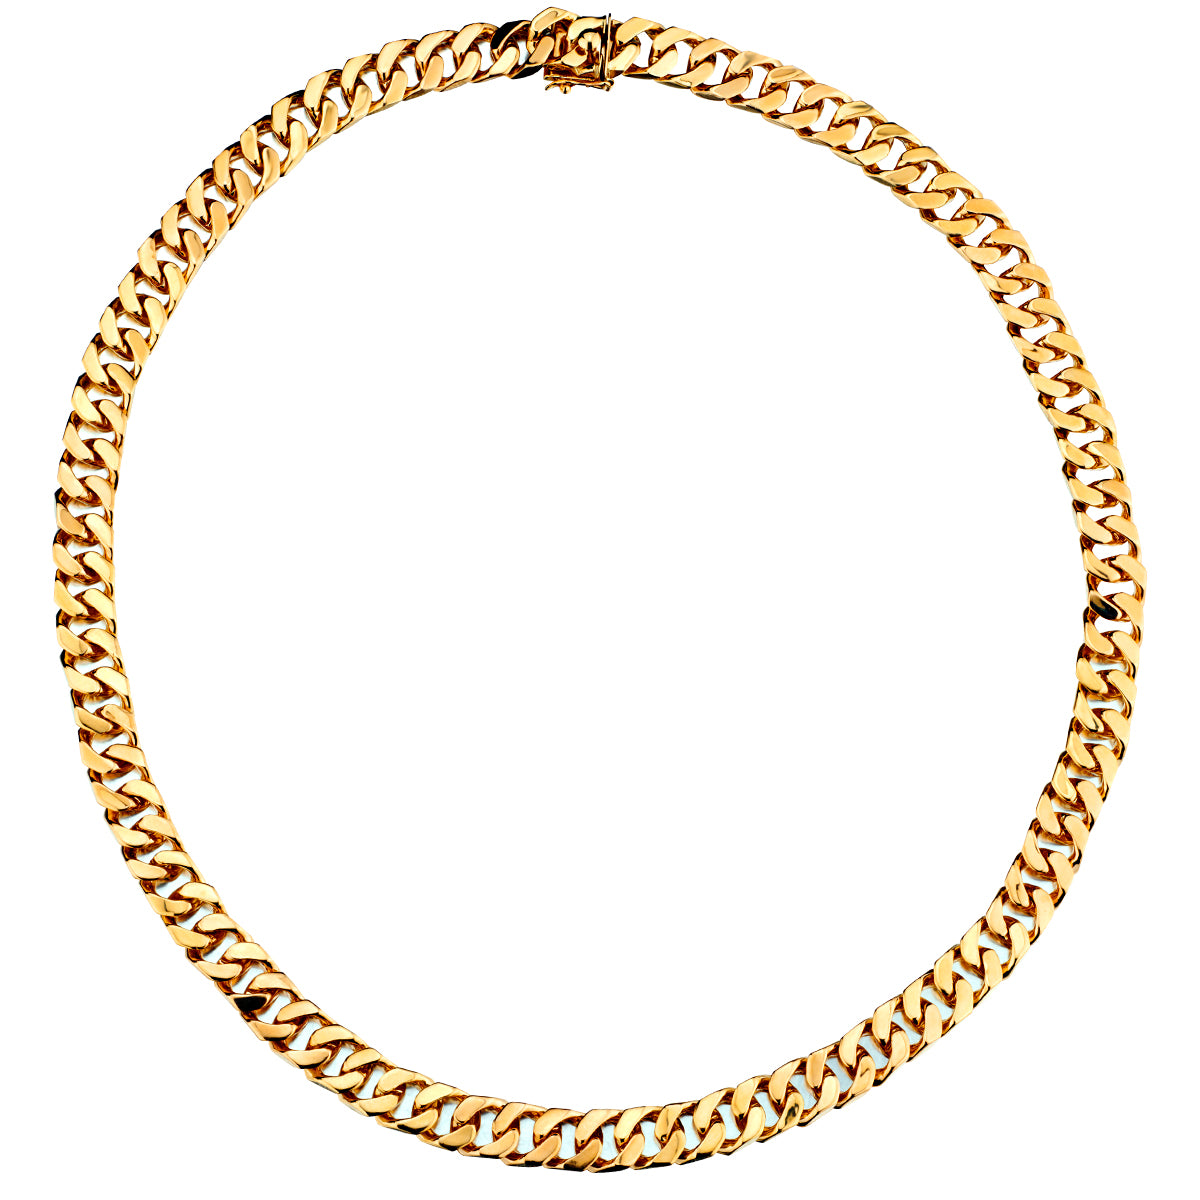 Unisex 14kt Yellow Gold Link Chain.  118 grams.